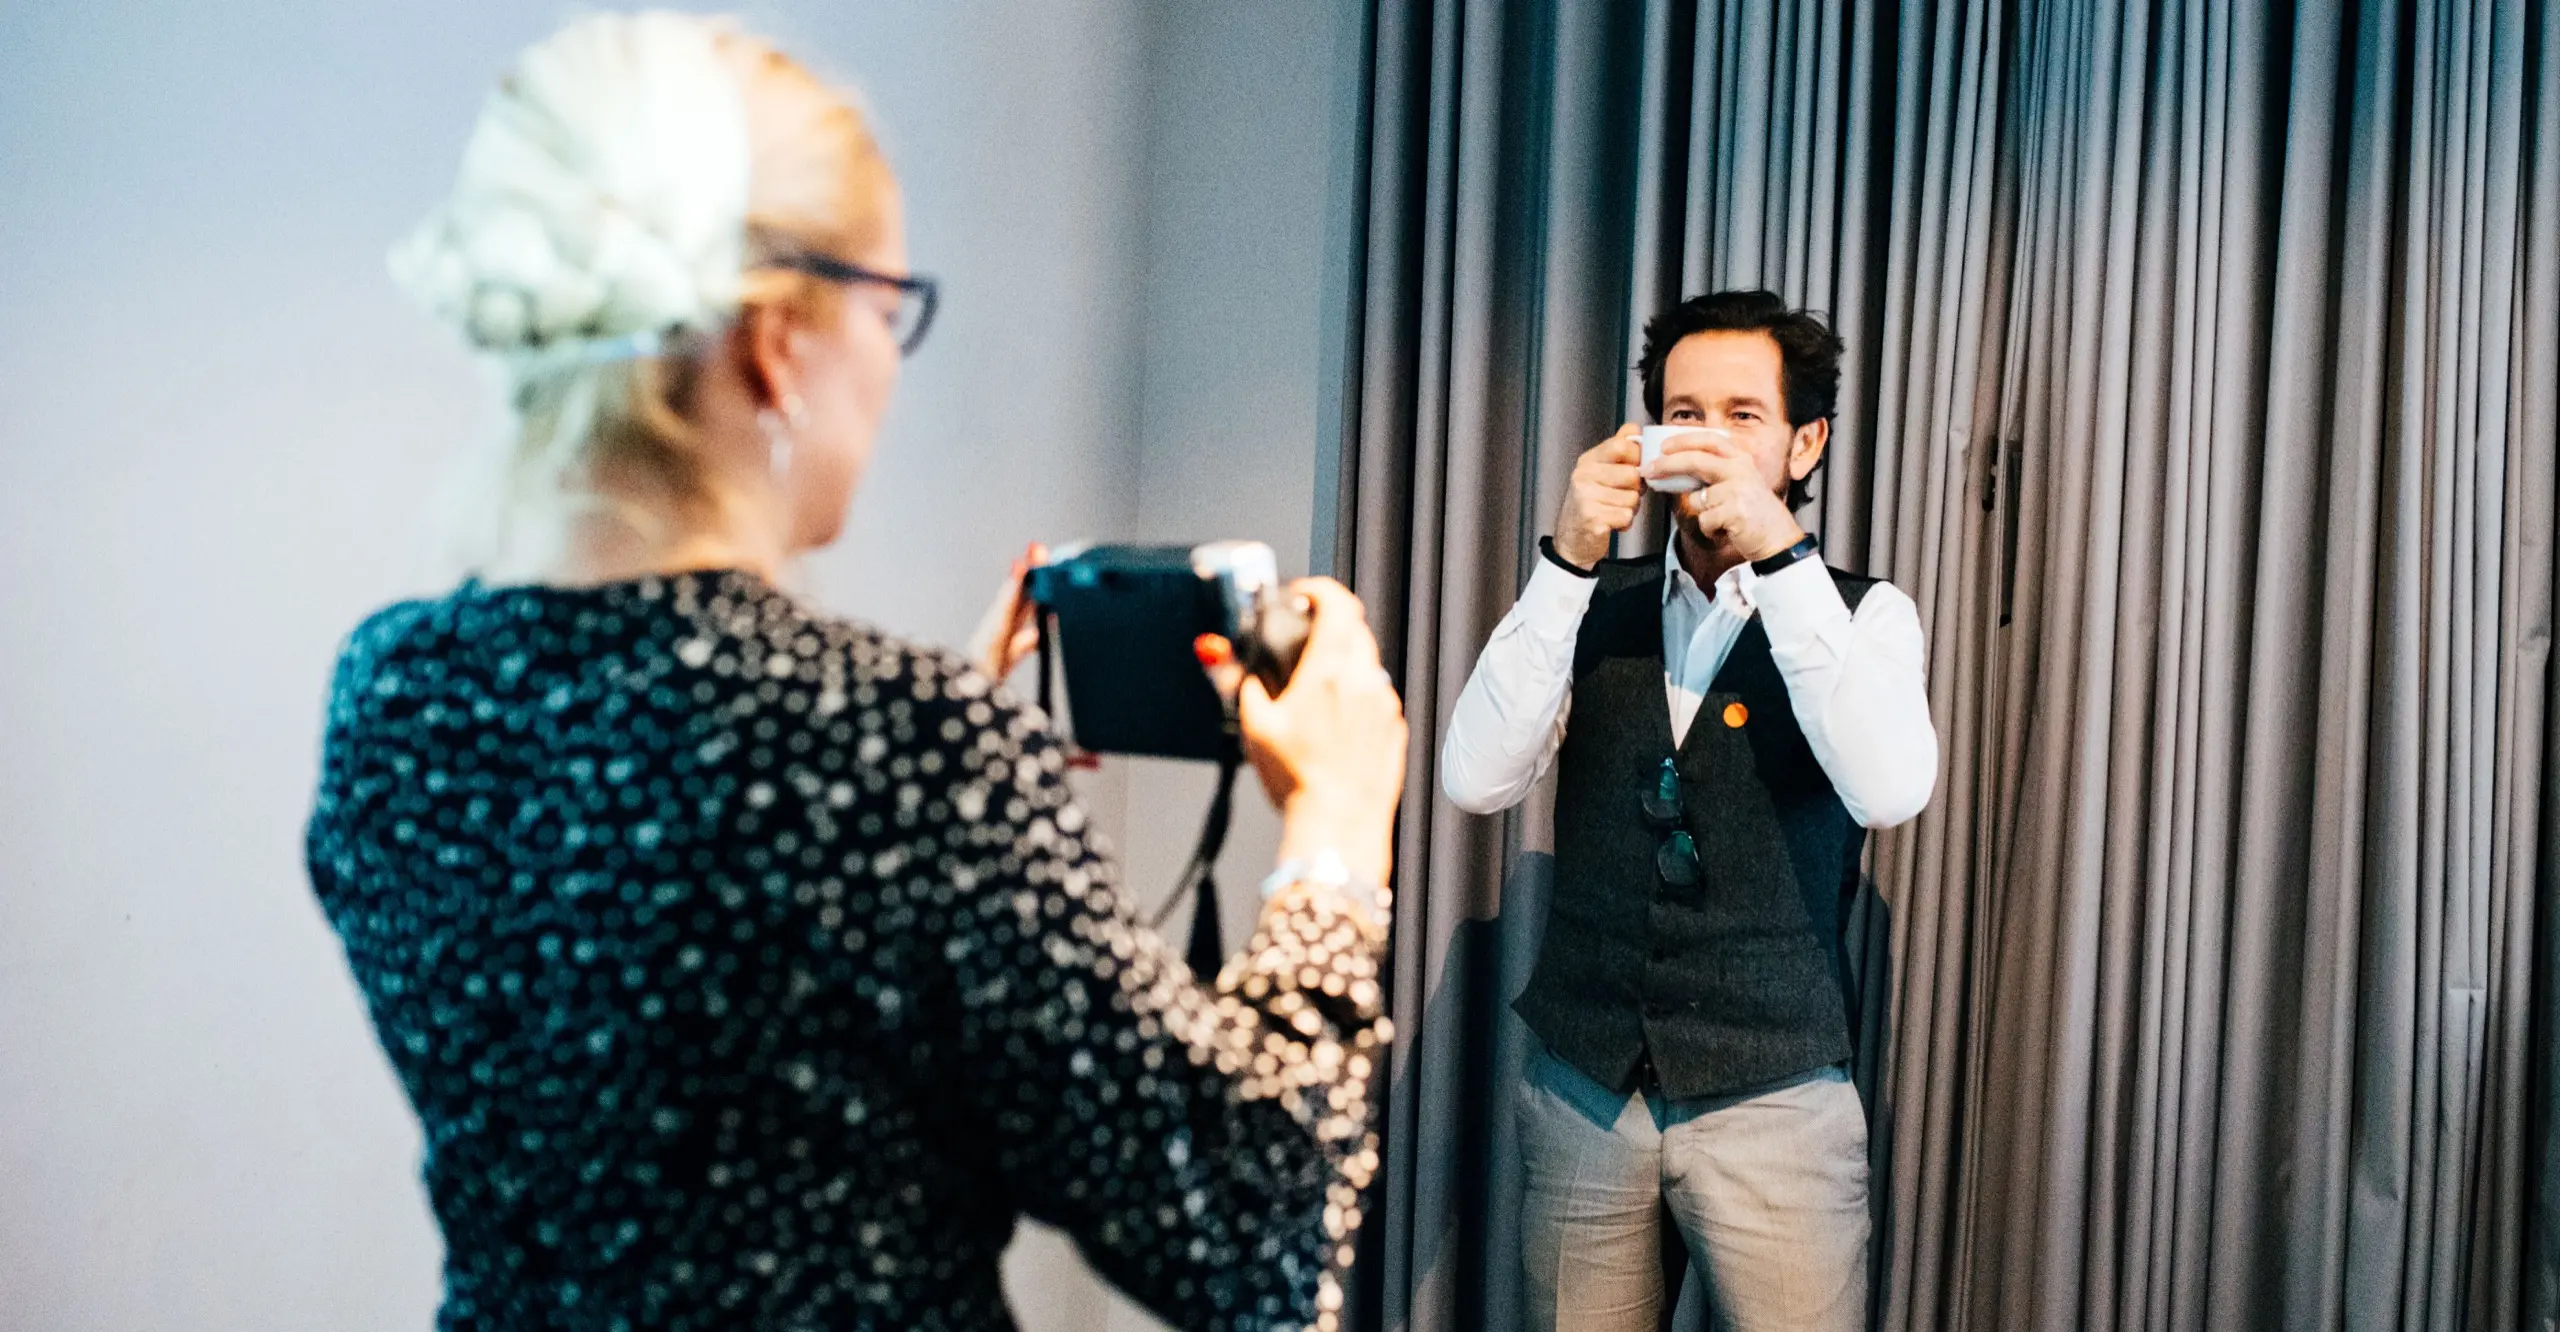 Photograph of white woman taking a photo of a man holding a cup in front of his face while standing in front of a grey curtain